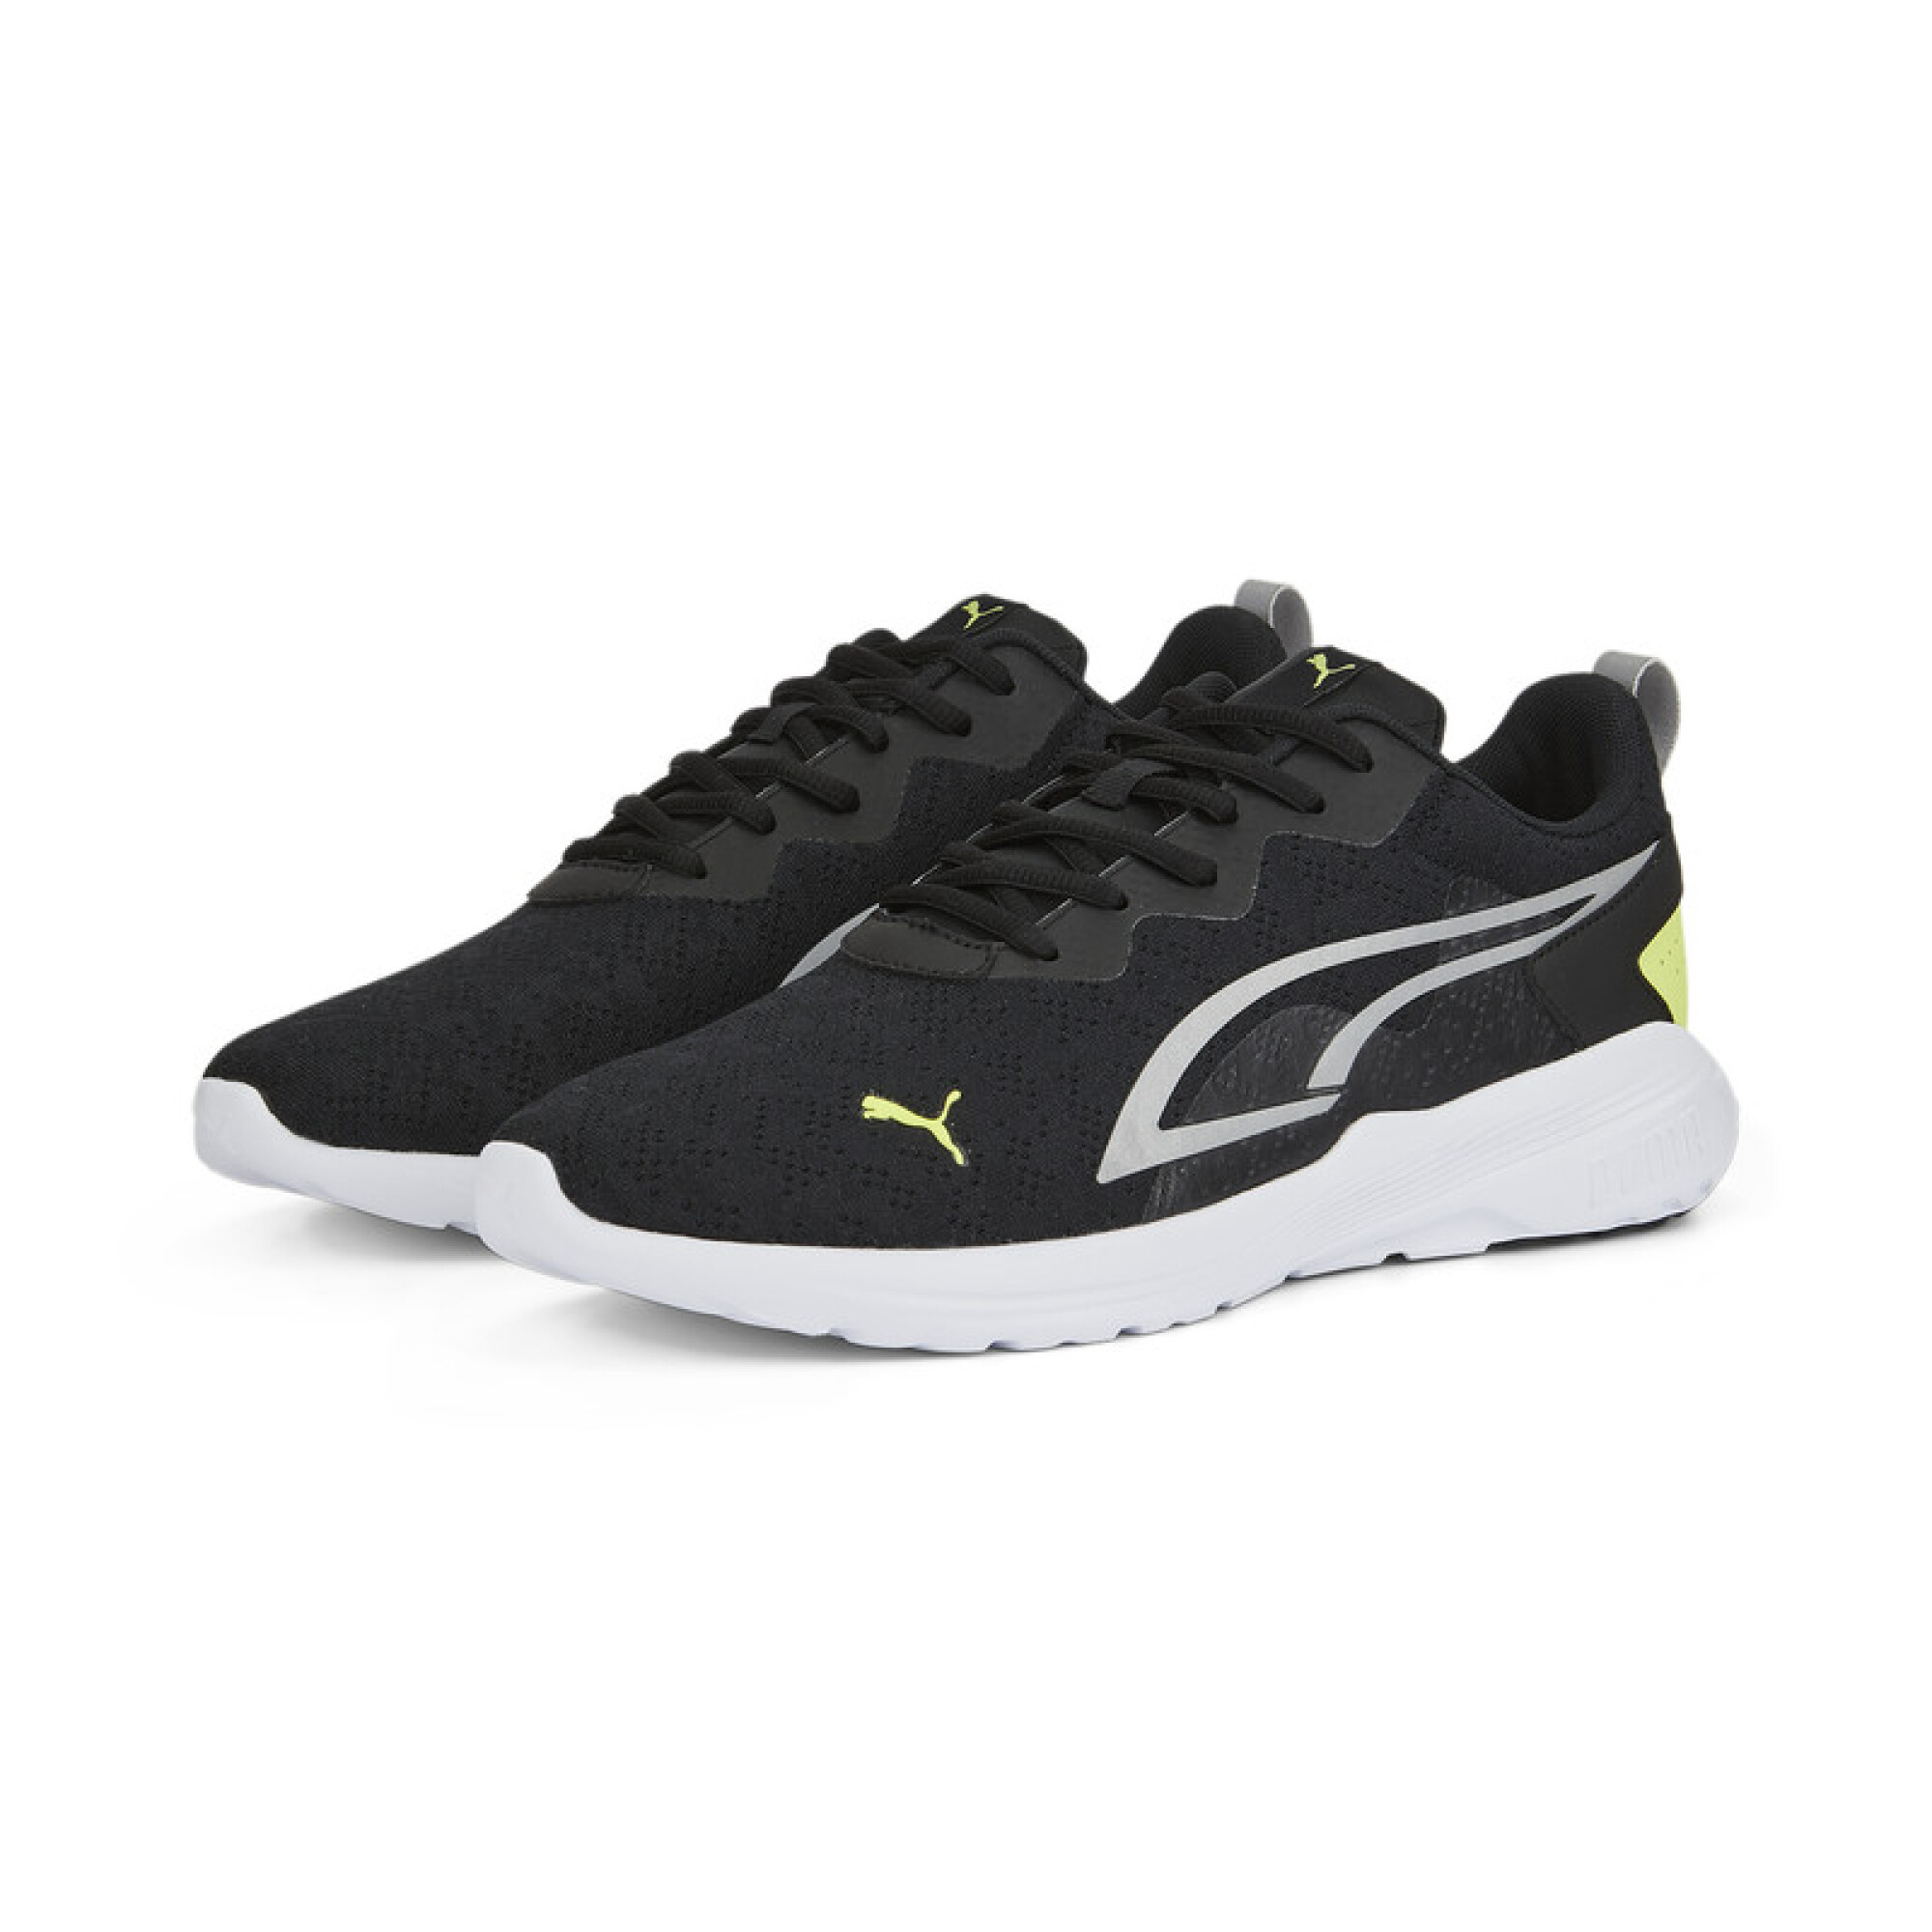 All-Day Active in Motion - Puma